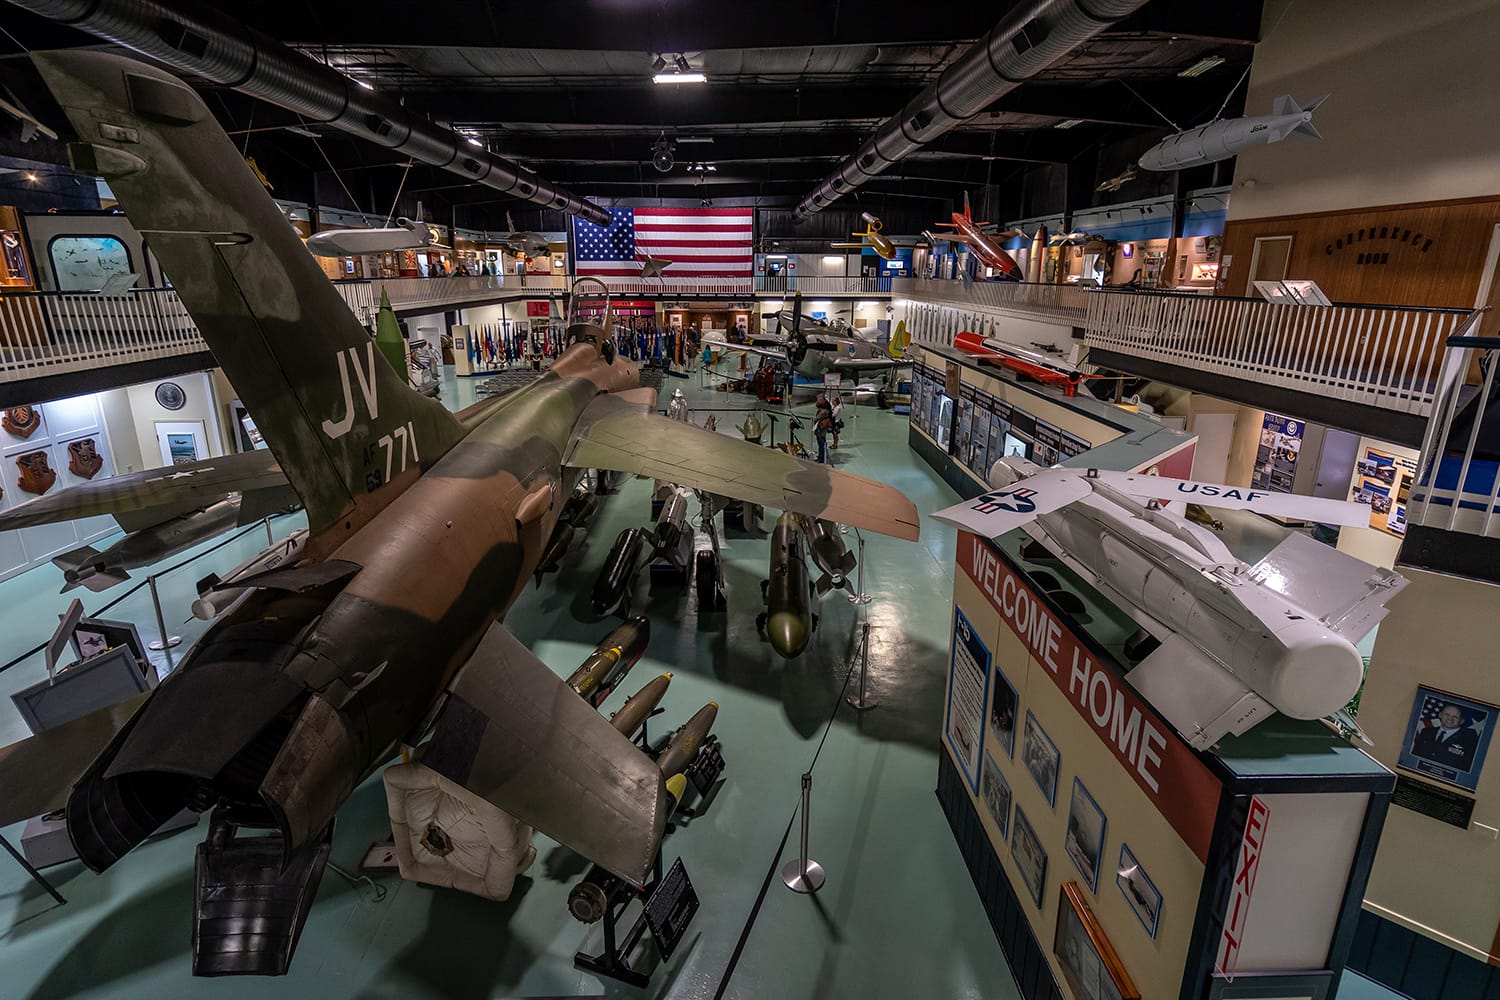 Air Force Armament Museum in Florida, USA